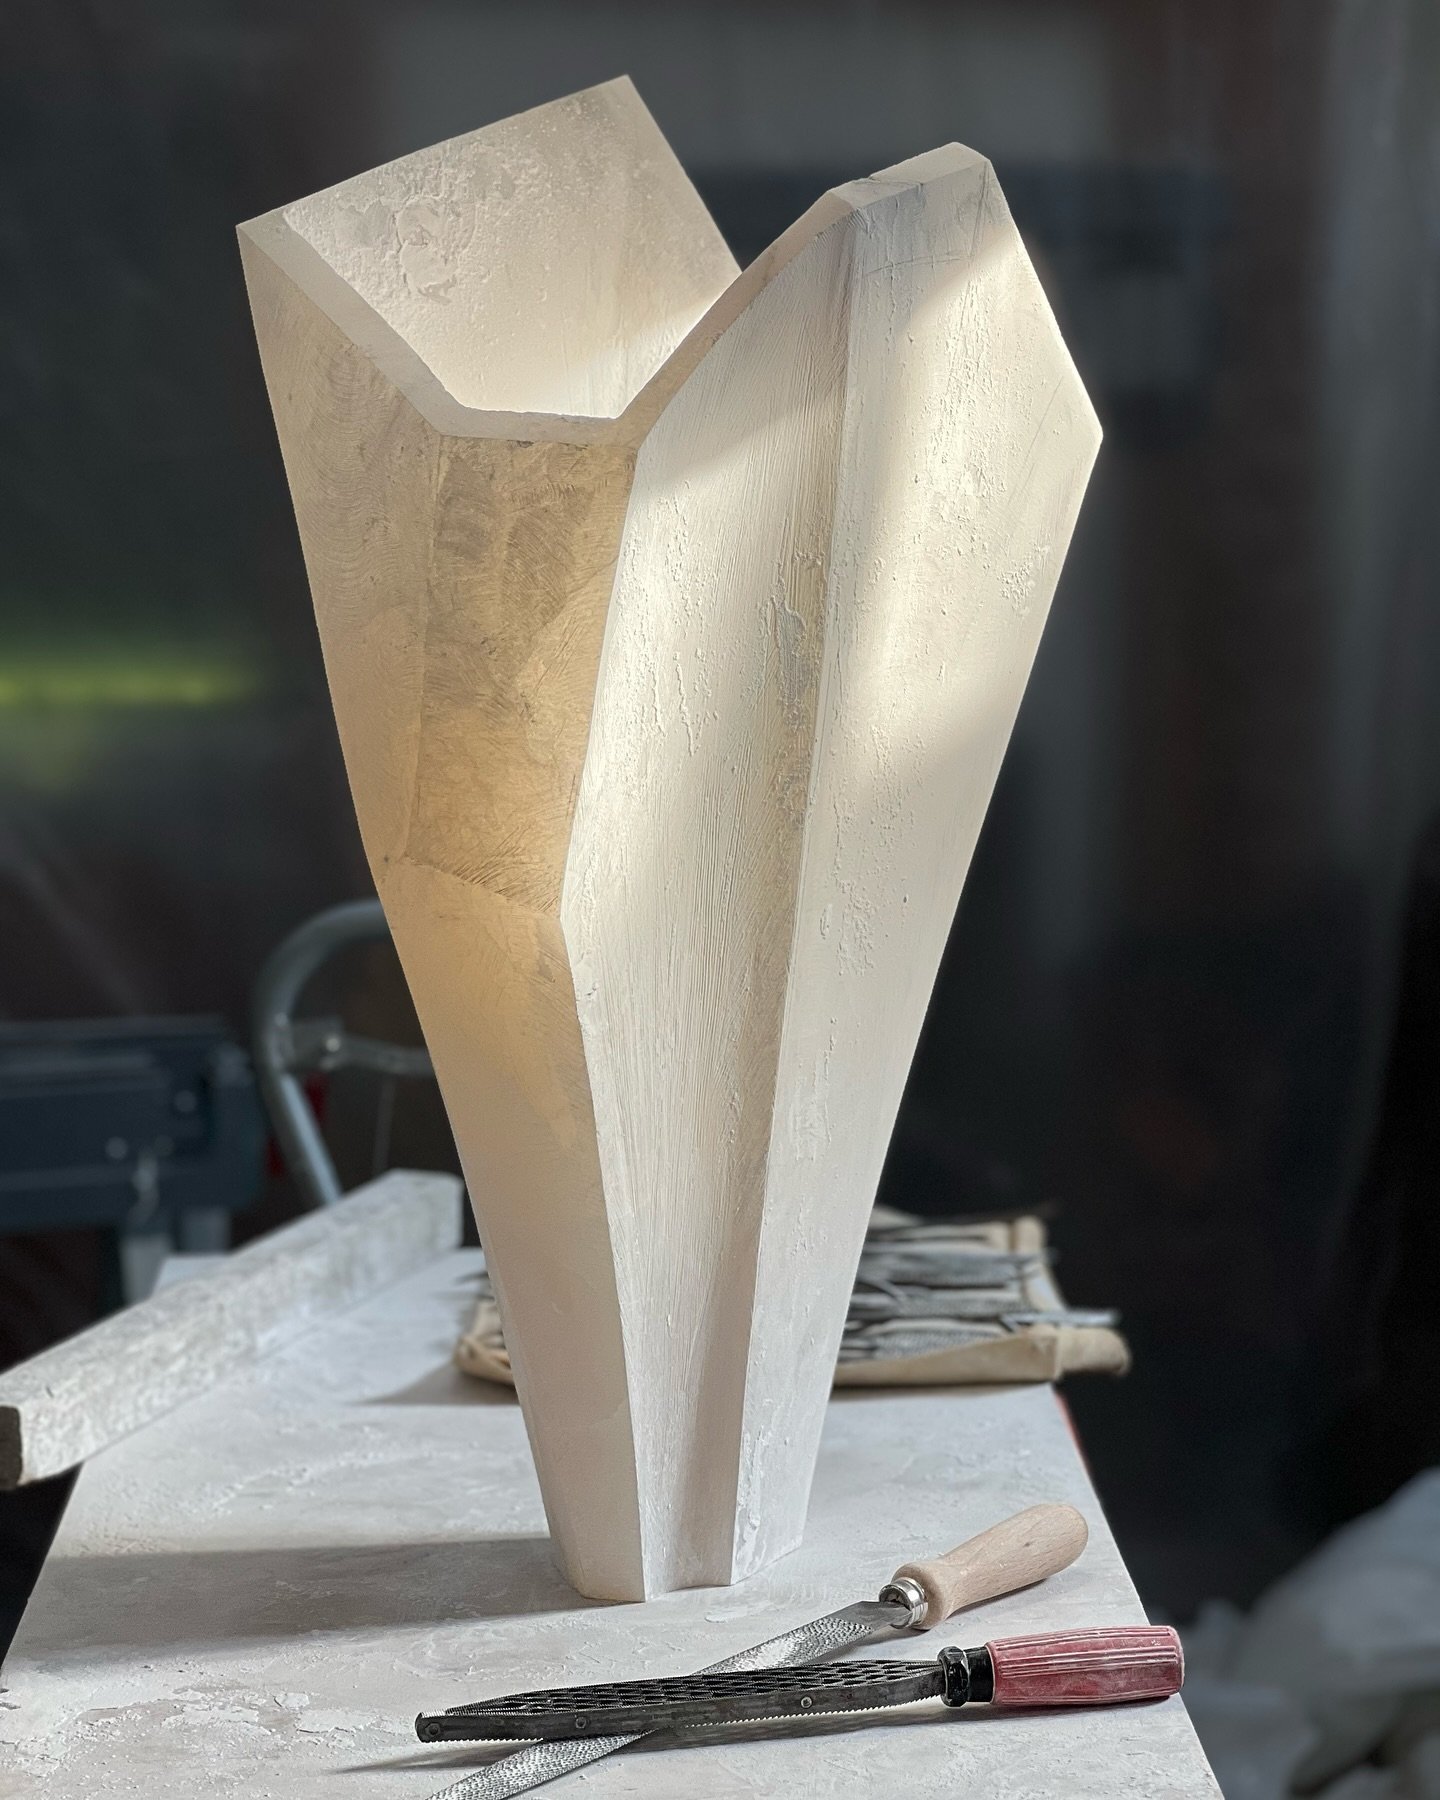 After the always nerve wracking stage of hollowing out, I&rsquo;m now refining the form of this Vault vase, deepening the curves and sharpening up the angles. I like to use a mix of Italian Milani rifflers and rasps for the curves  and a Japanese Shi